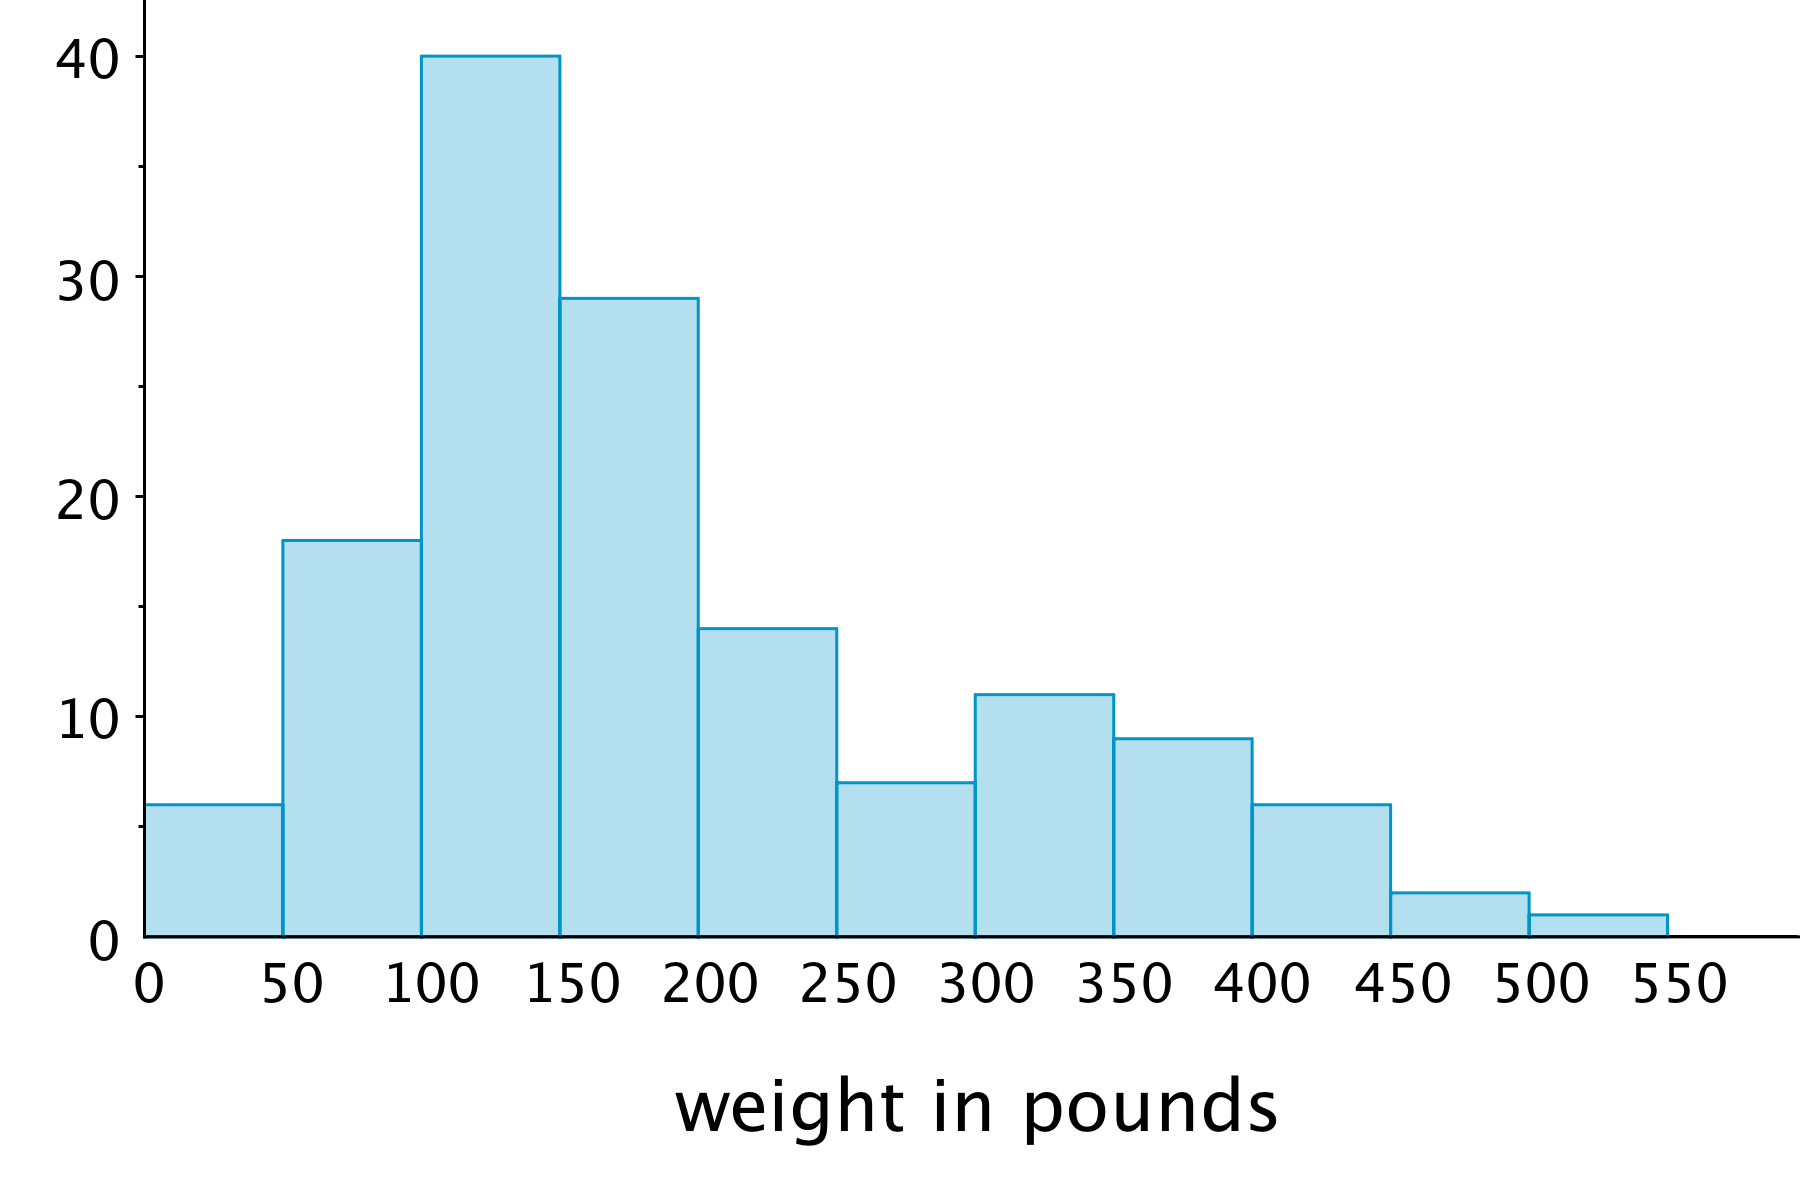 A histogram. The horizontal axis is labeled "weight in pounds" and the numbers 0 through 550, in increments of 50, are indicated. On the vertical axis, the numbers 0 through 40, in increments of 5, are indicated. There are also tick marks midway between. The approximate data for the bars are as follows: From 0 up to 50 pounds, 6 bears  From 50 up to 100 pounds, 18 bears From 100 up to 150 pounds, 40 bears  From 150 up to 200 pounds, 28 bears  From 200 up to 250 pounds, 14 bears  From 250 up to 300 pounds, 7 bears  From 300 up to 350 pounds, 11 bears   From 350 up to 400 pounds, 10 bears  From 400 up to 450 pounds, 6 bears From 450 up to 500 pounds, 2 bears From 500 up to 550 pounds, 1 bear